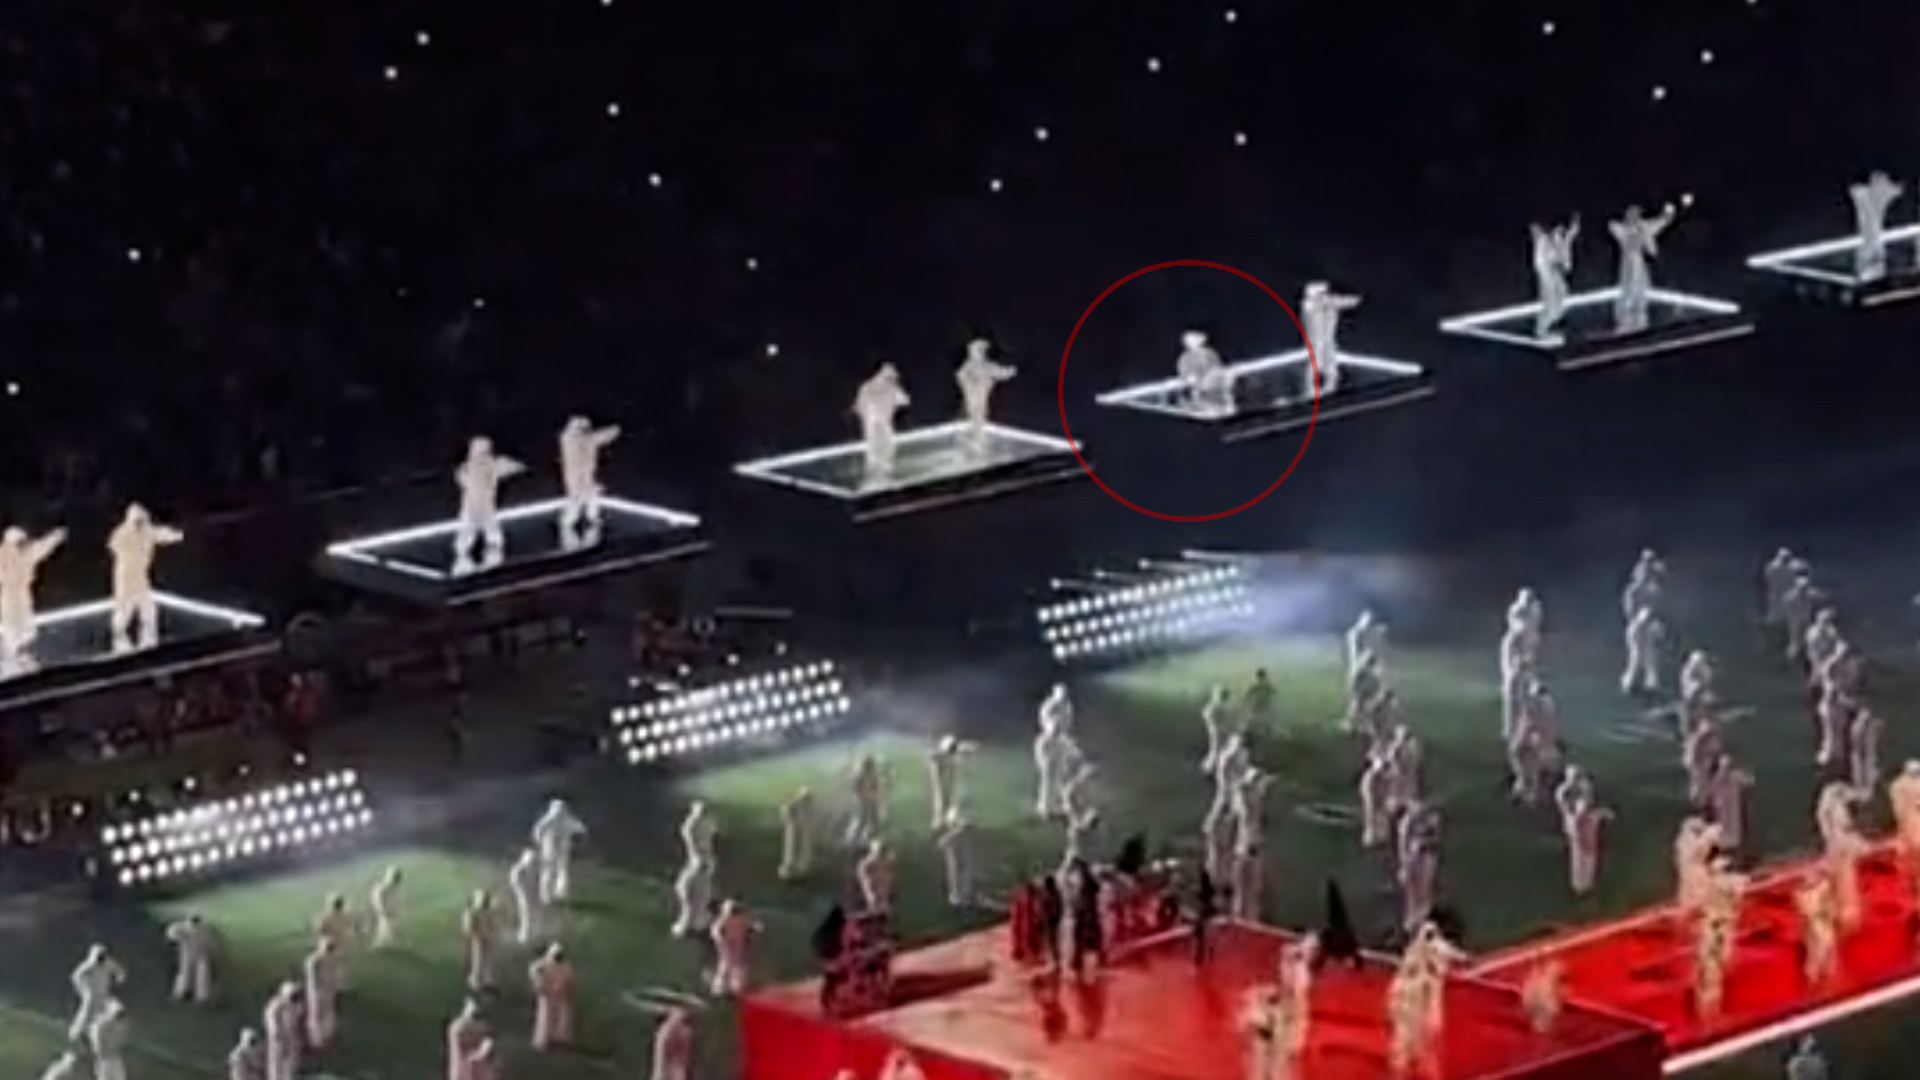 One of Rihanna's dancers almost tragically falls from elevated platform during Super Bowl halftime show